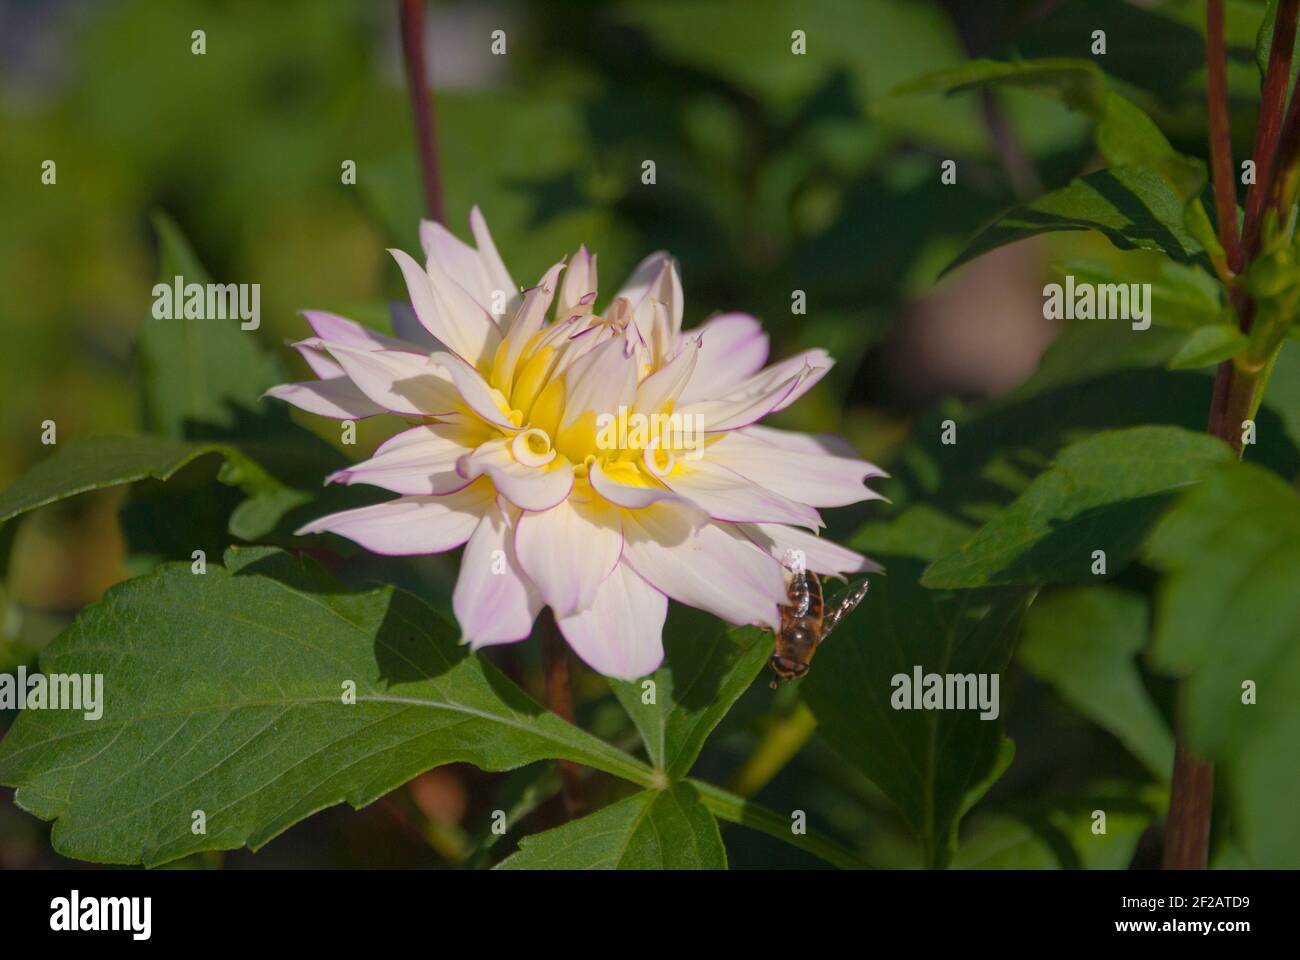 Blossom of a yellow and white chrysanthemum flower. Stock Photo